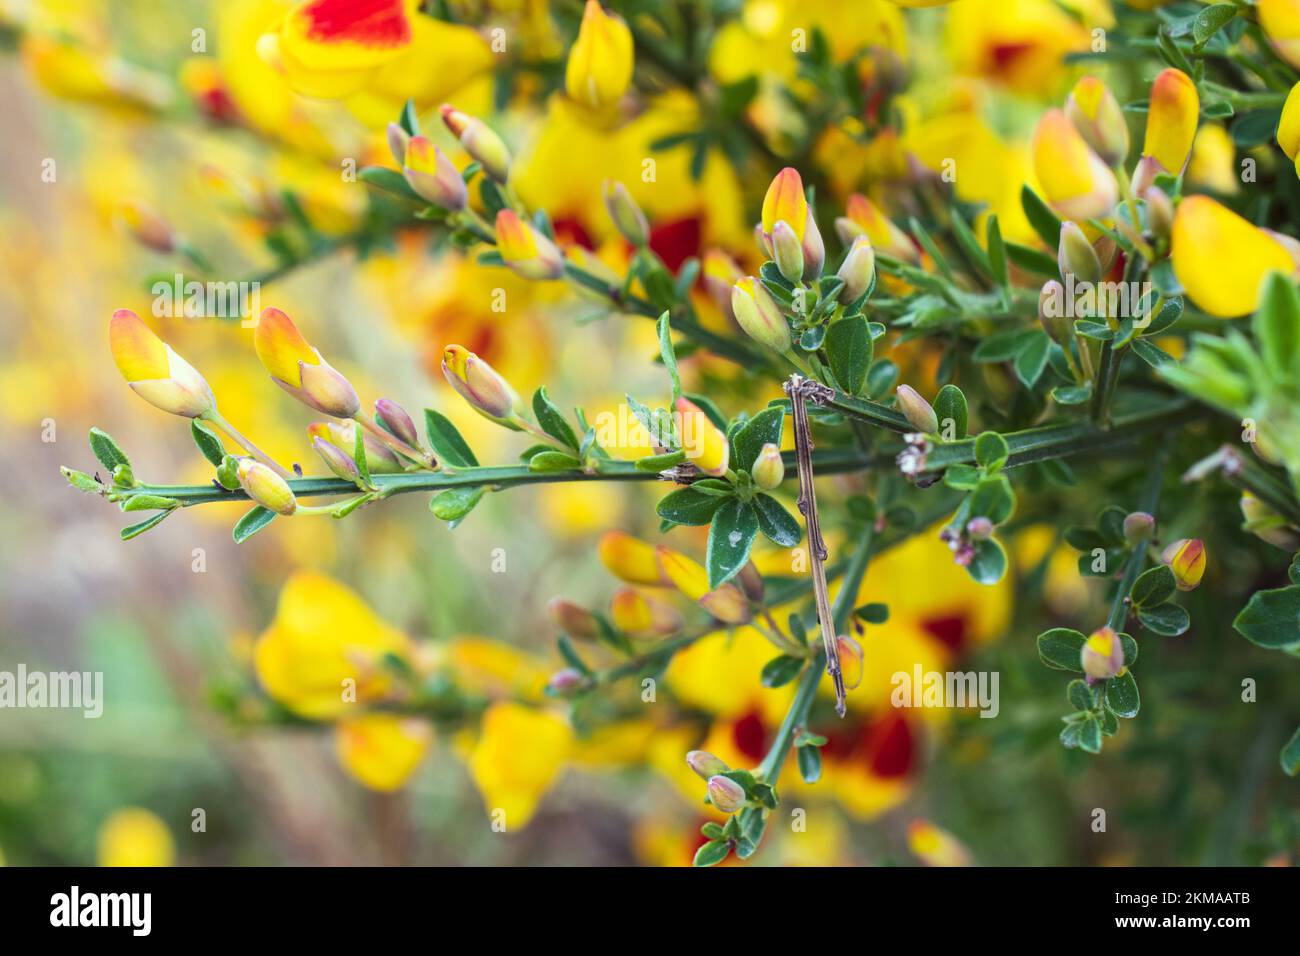 Vibrant Scotch Broom Plants in Bloom in Ushuaia, Argentina. In full bloom with rich hues of yellow and red. Stock Photo